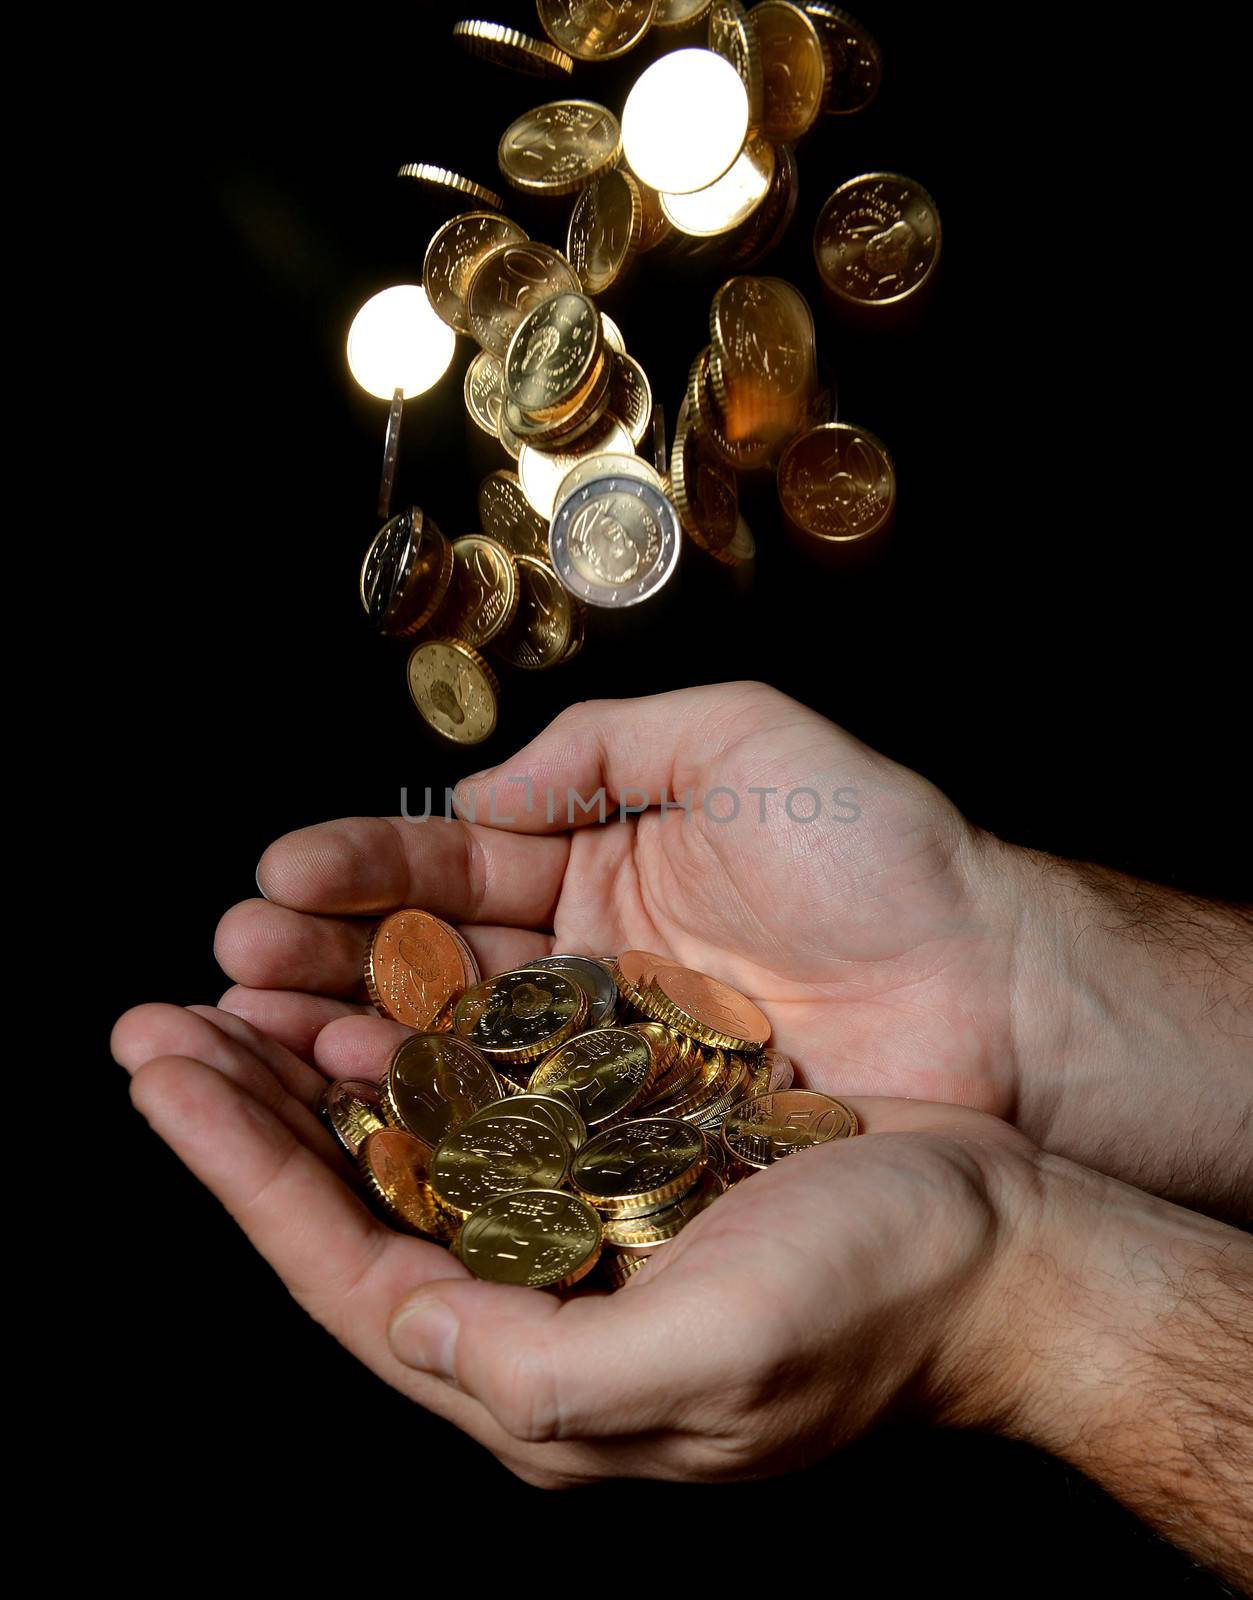 Man Hands full of money receiving a Rain of Coins by ocusfocus